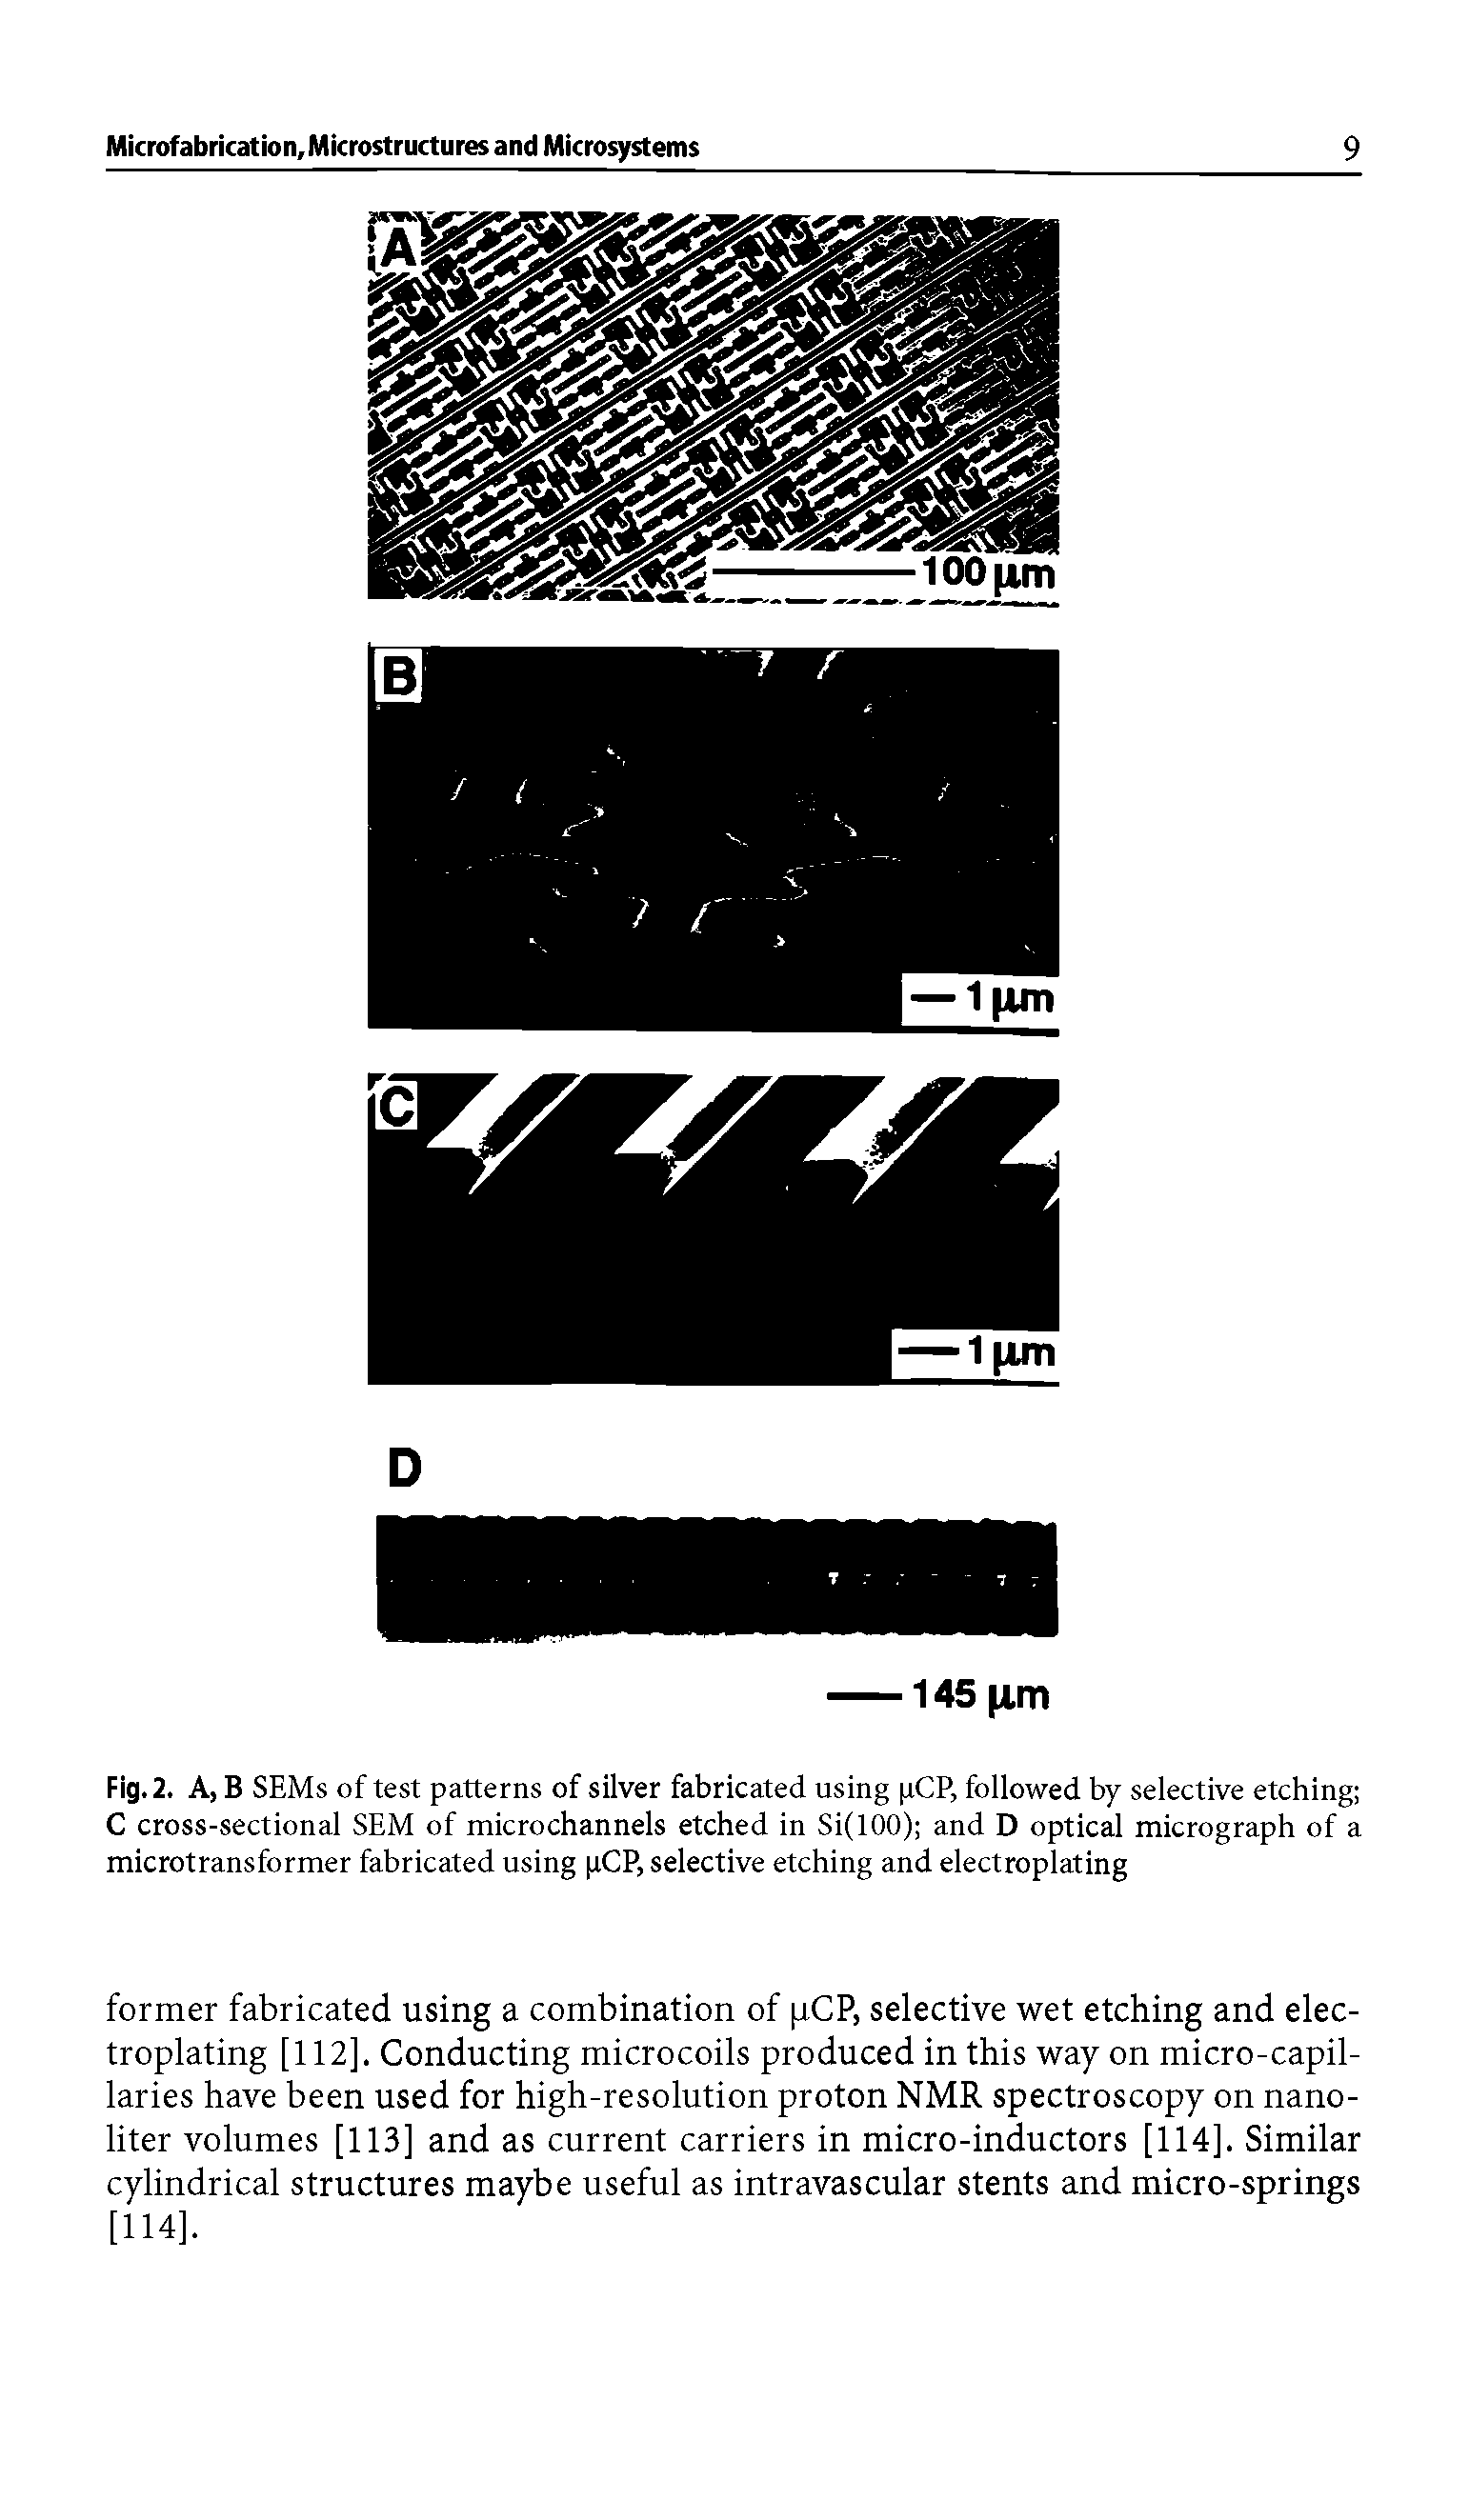 Fig. 2. A B SEMs of test patterns of silver fabricated using pCP, followed by selective etching C cross-sectional SEM of microchannels etched in Si(100) and D optical micrograph of a microtransformer fabricated using pCP, selective etching and electroplating...